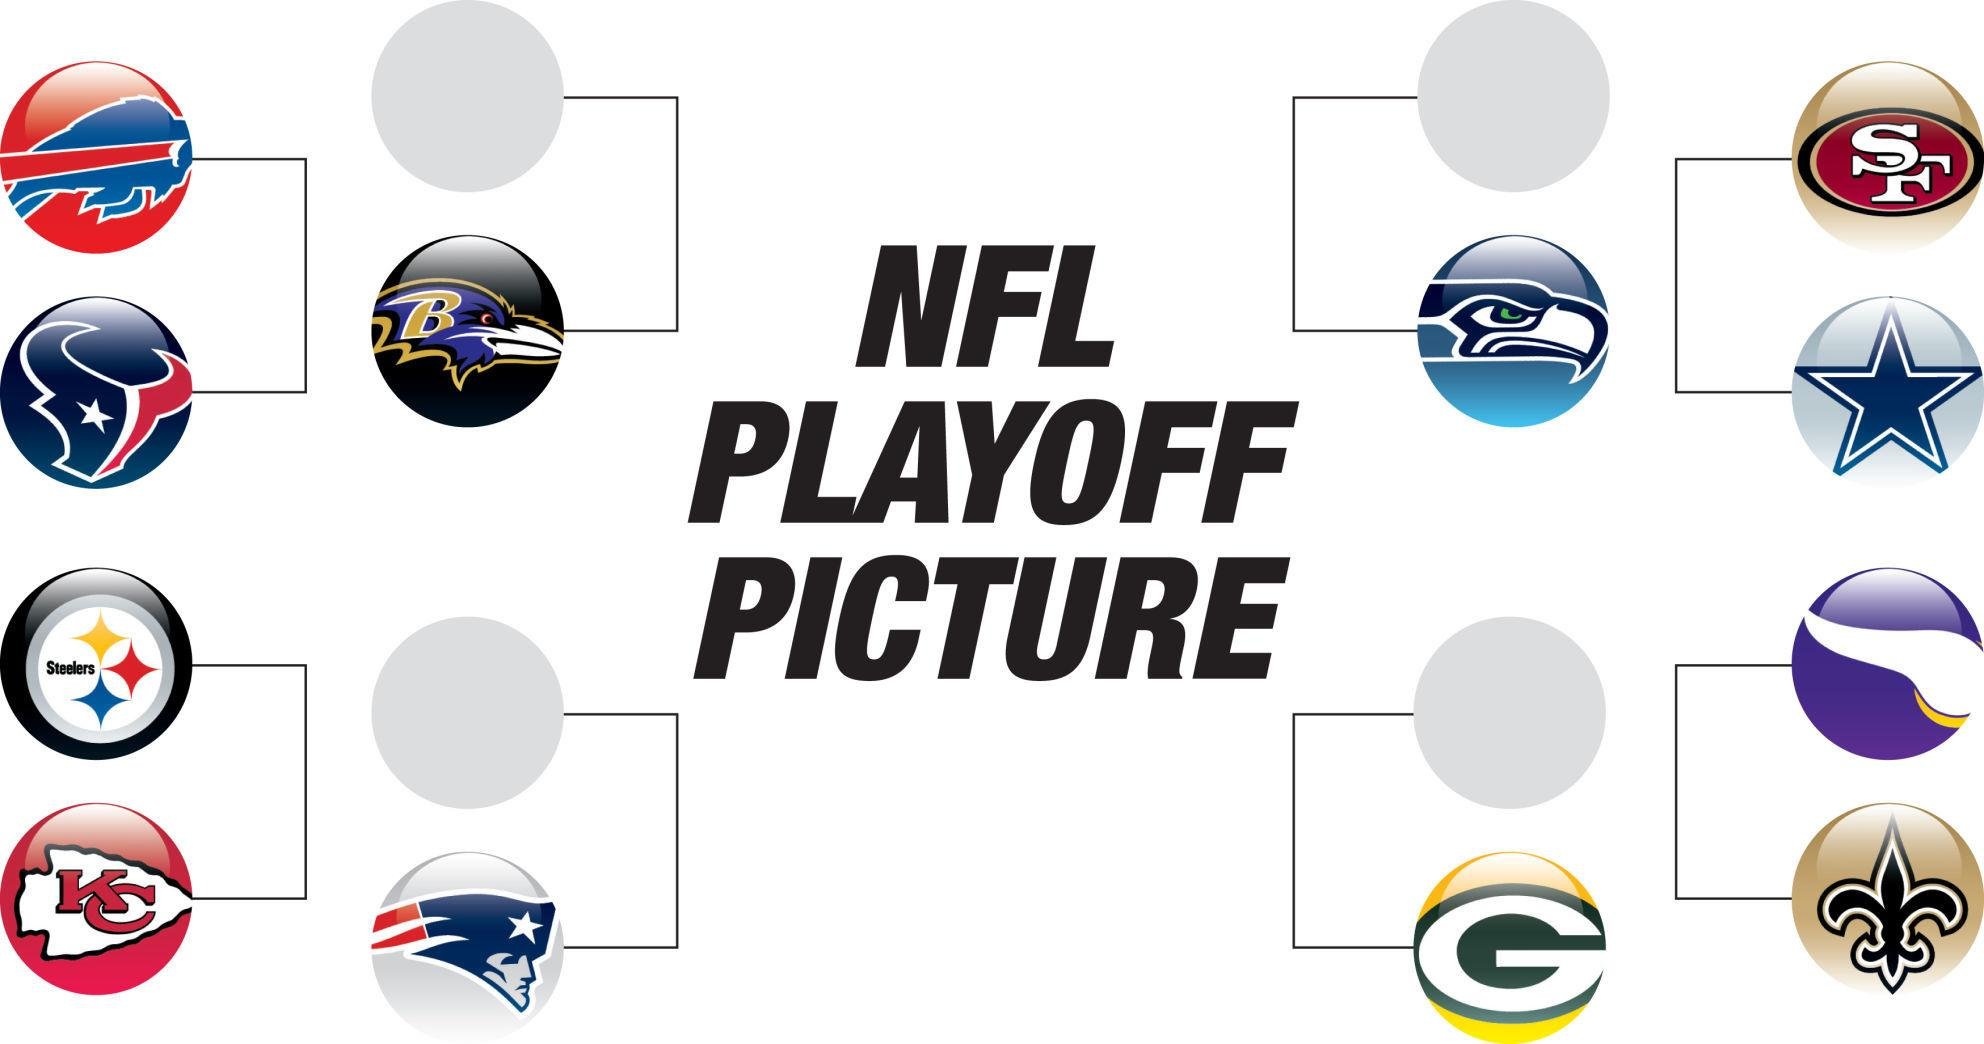 With 2 Weeks Remaining The Nfl Playoff Picture And Projected Playoff